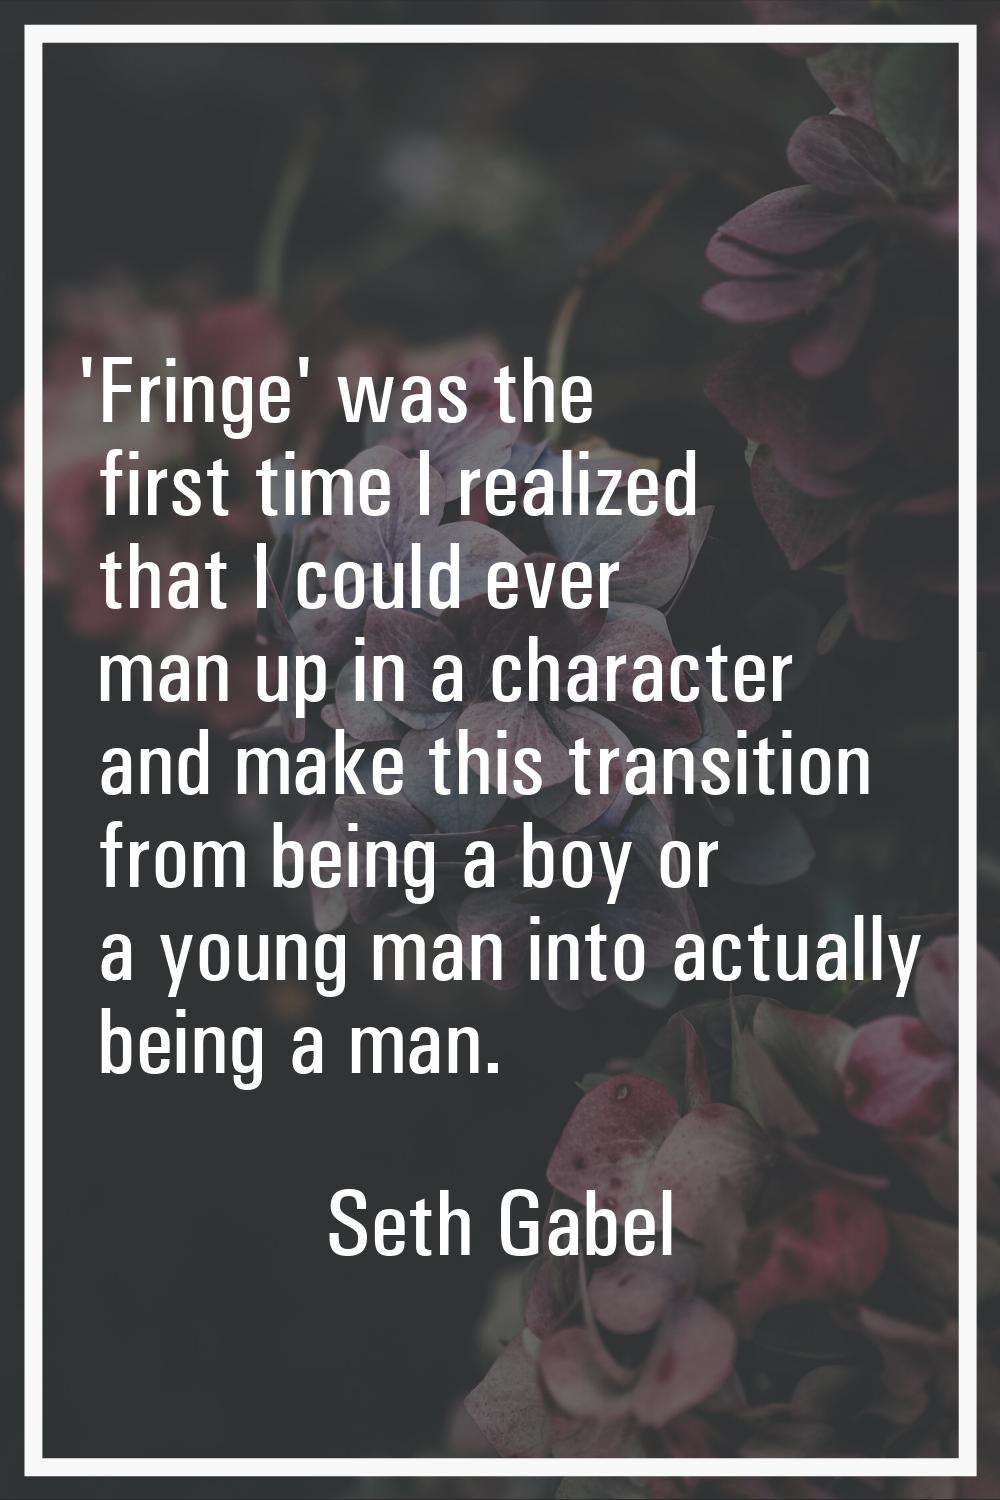 'Fringe' was the first time I realized that I could ever man up in a character and make this transi